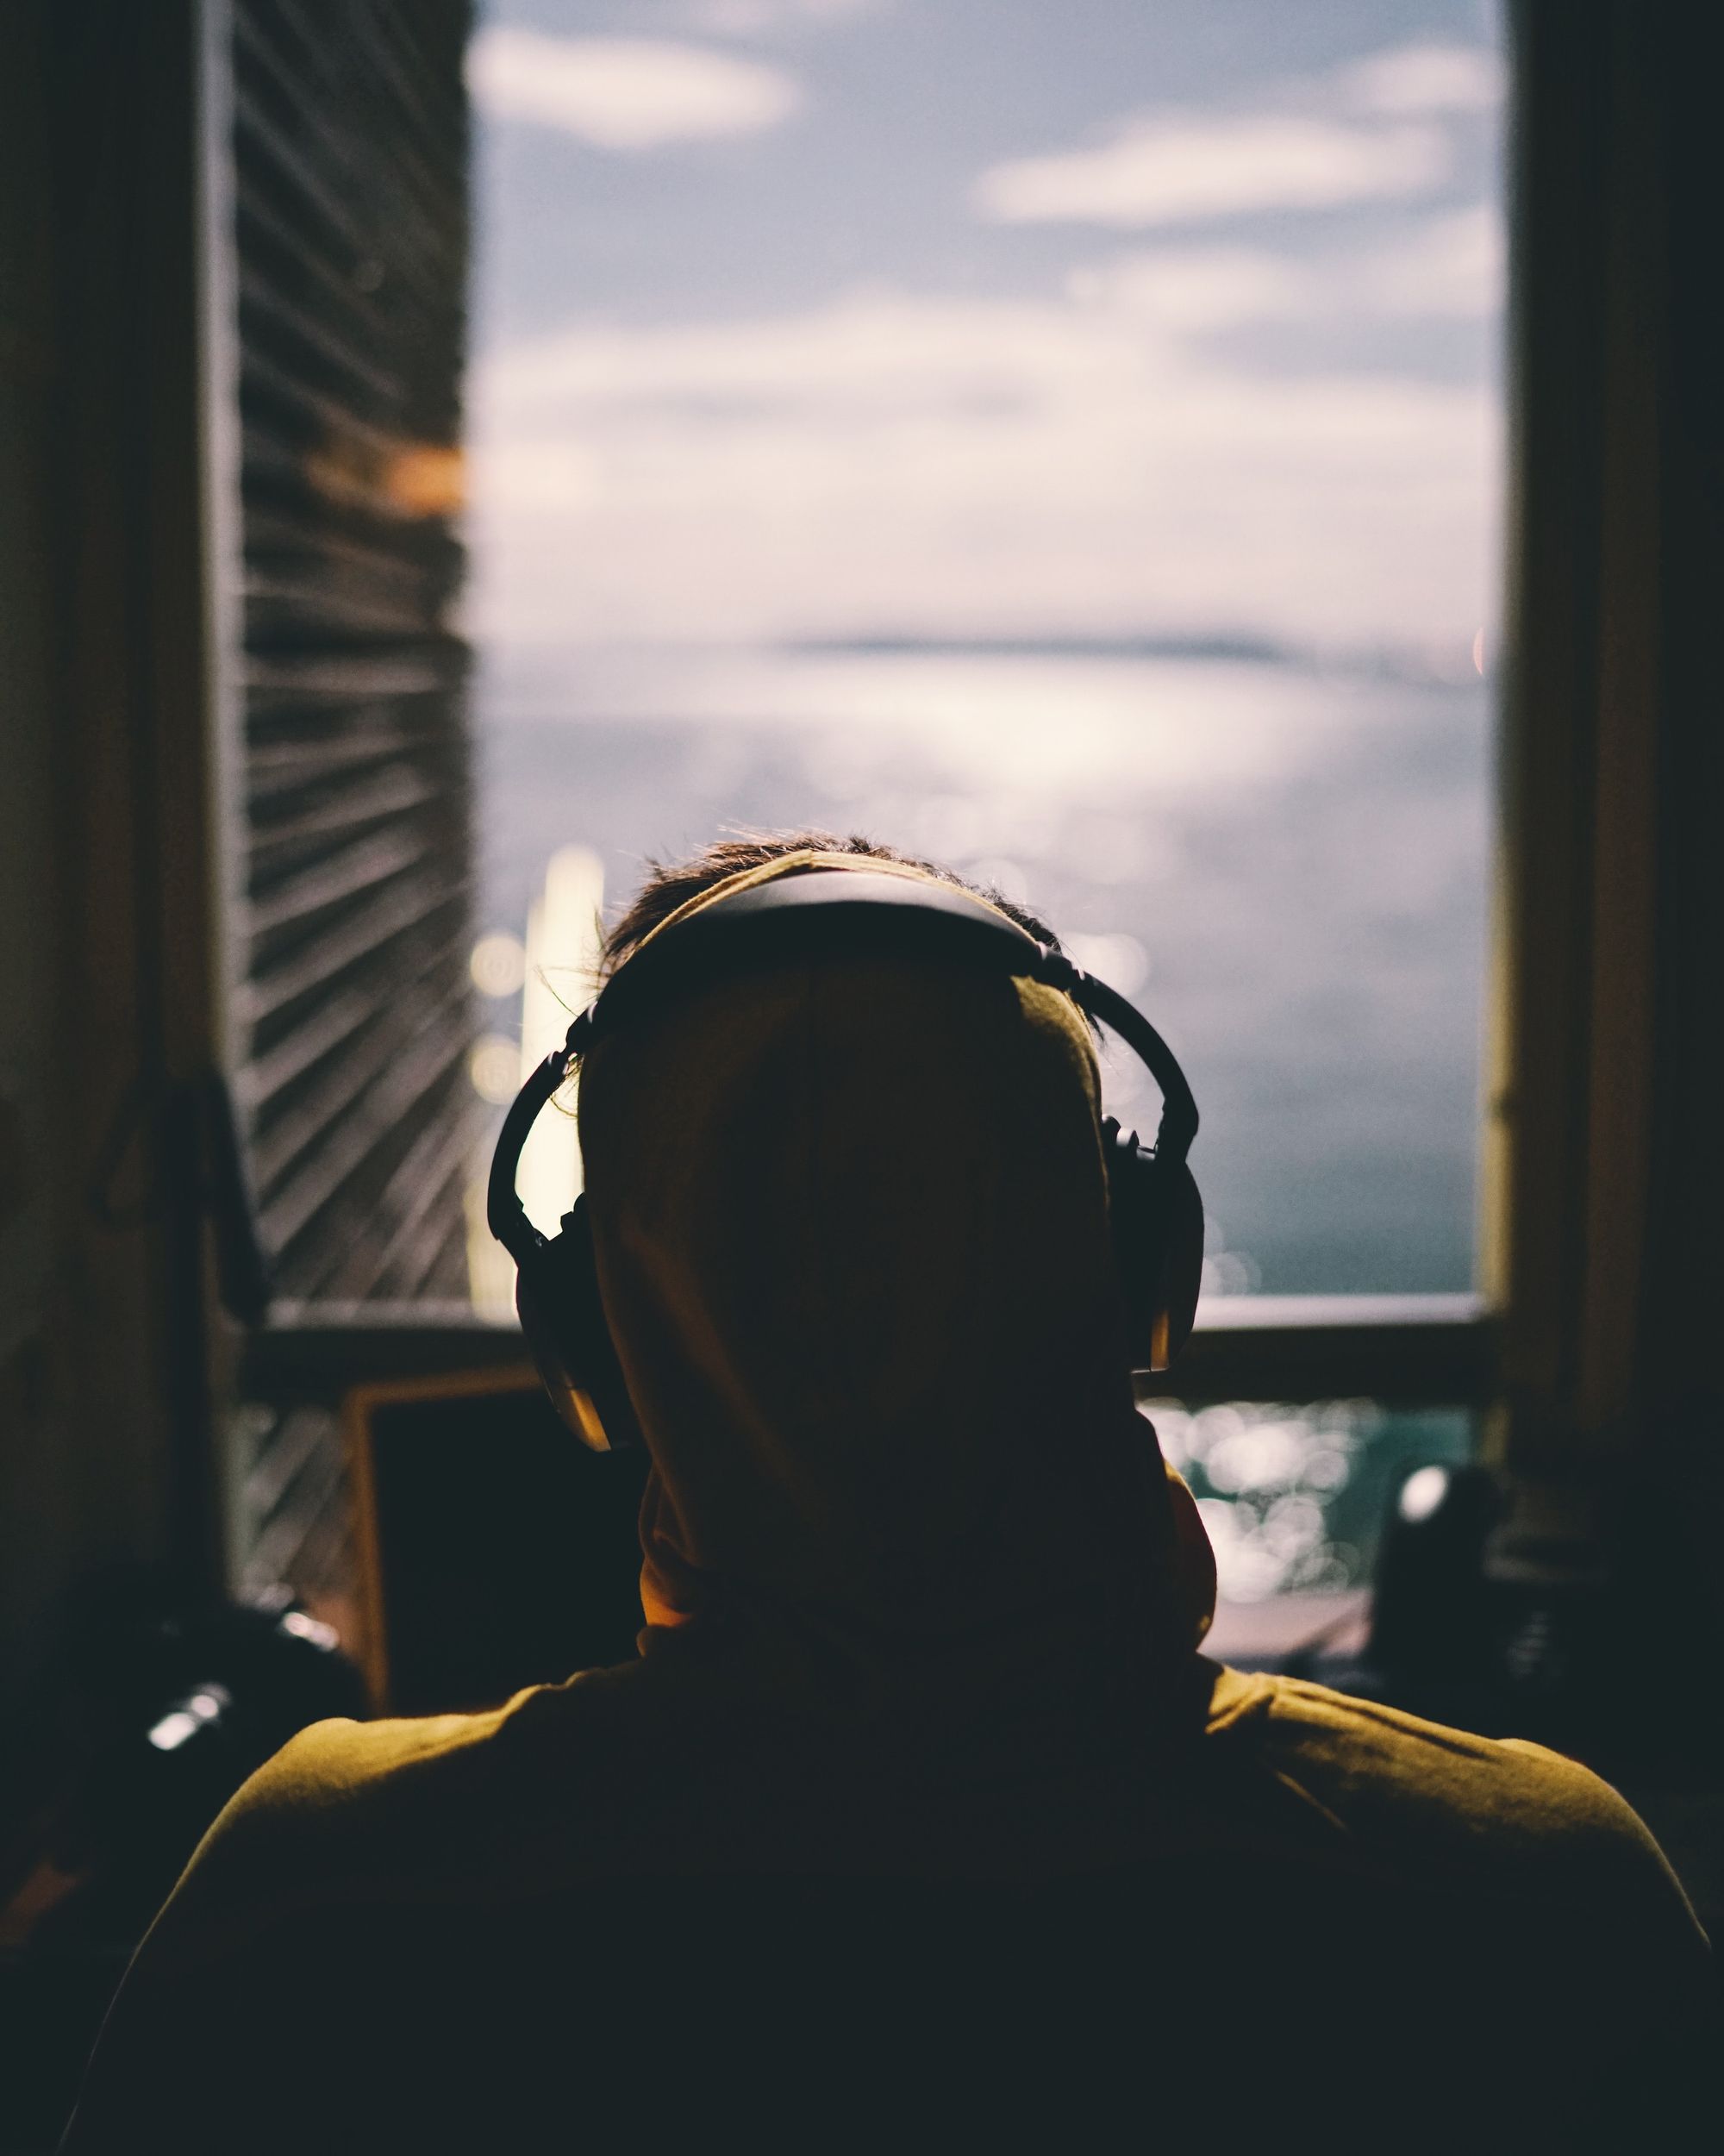 A person wearing headphones sitting down and facing a window, looking out over a body of water.